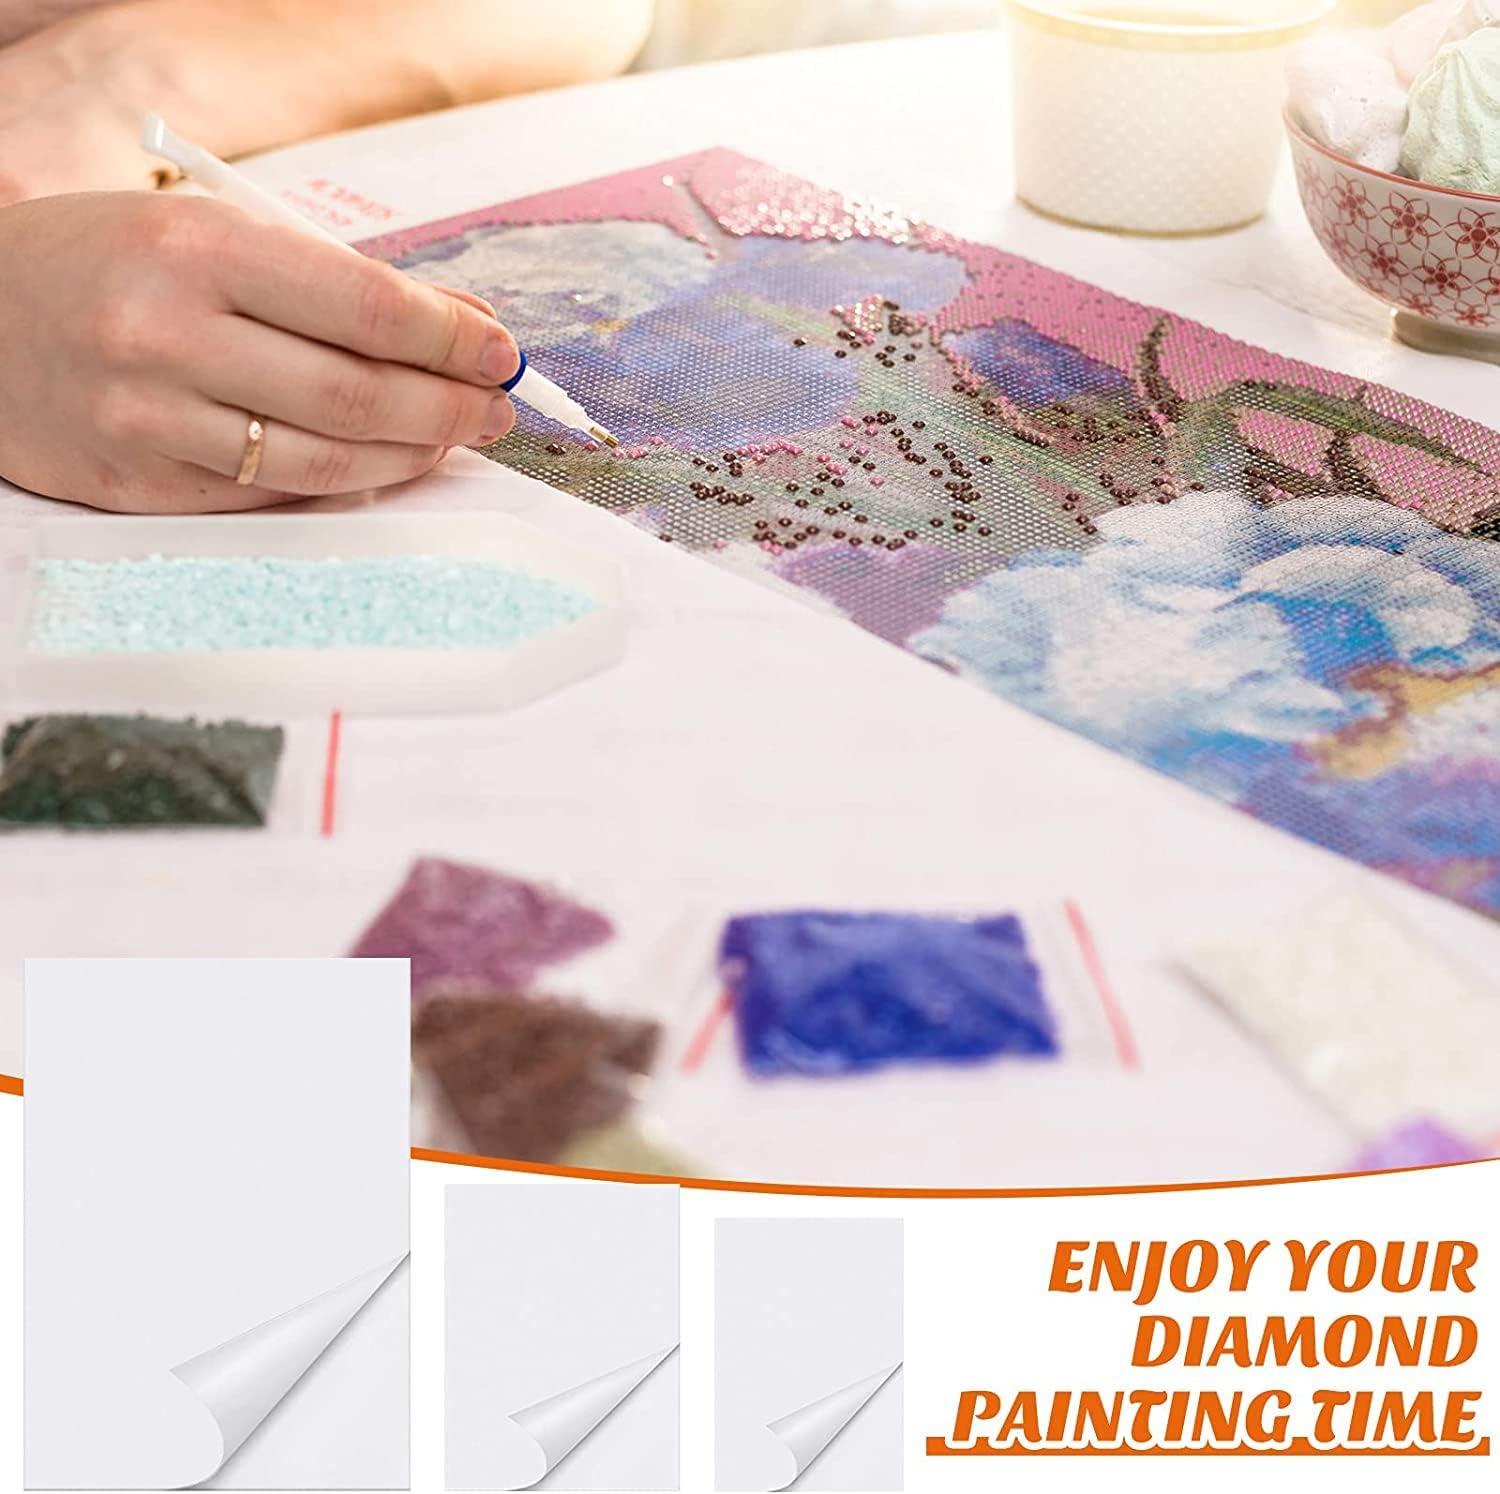 200PCS Diamond Painting Release Paper Double-Sided Release Paper Non-Stick Diamond  Painting Cover Paper for 5D Diamond Embroidery Accessories 15 x 15 cm/ 5.9  x 5.9 inch